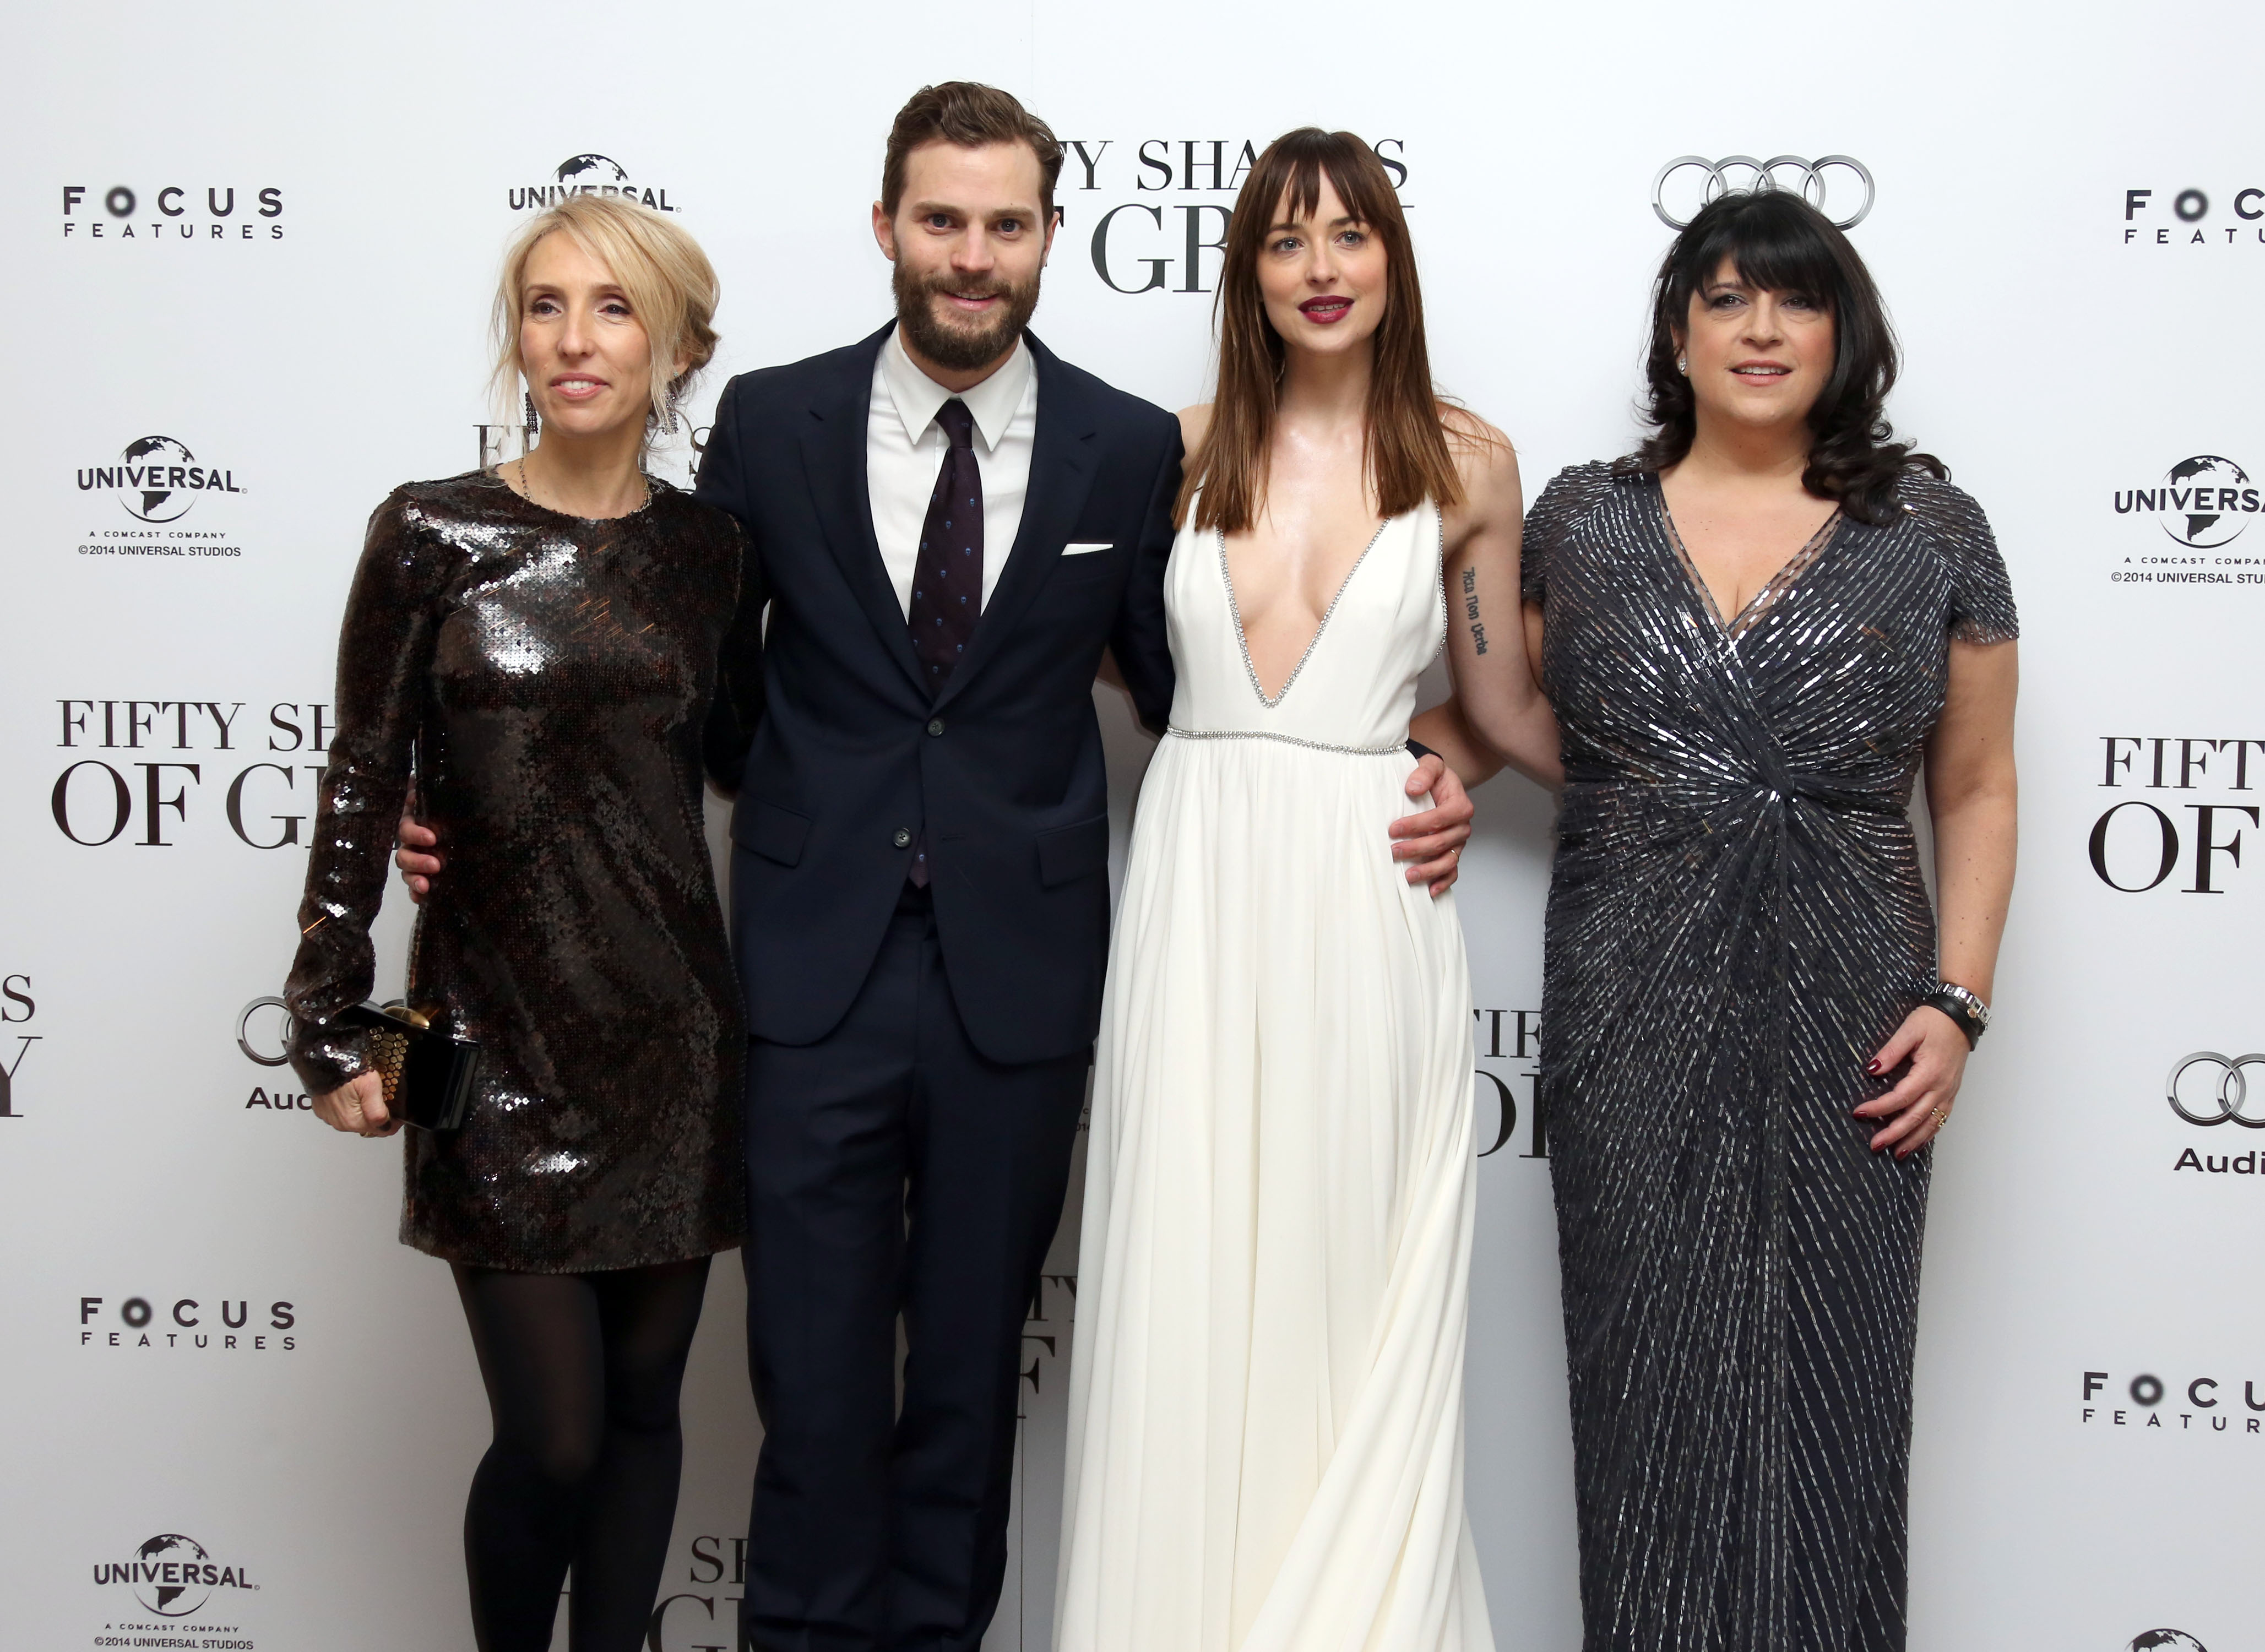 Sam Taylor-Johnson, Jamie Dornan, Dakota Johnson and E.L. James  pose for photographers upon arrival at the UK premiere of the film <i>Fifty Shades of Grey</i>
                      in London, Feb. 12, 2015 (Joel Ryan—Invision/AP)